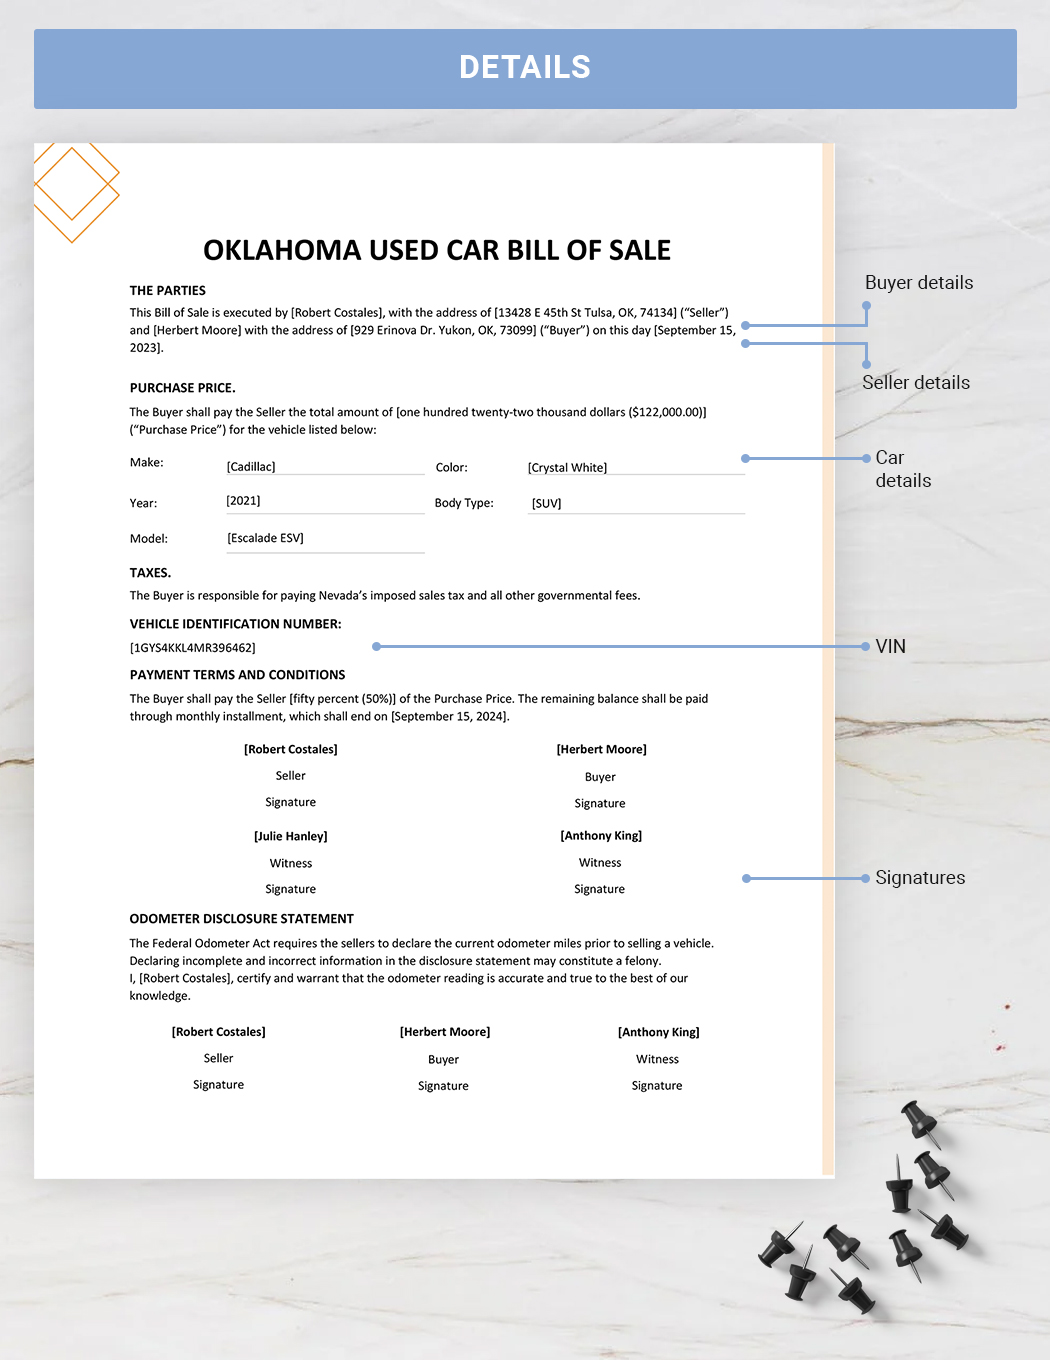 Oklahoma Used Car Bill of Sale Template Download in Word, Google Docs